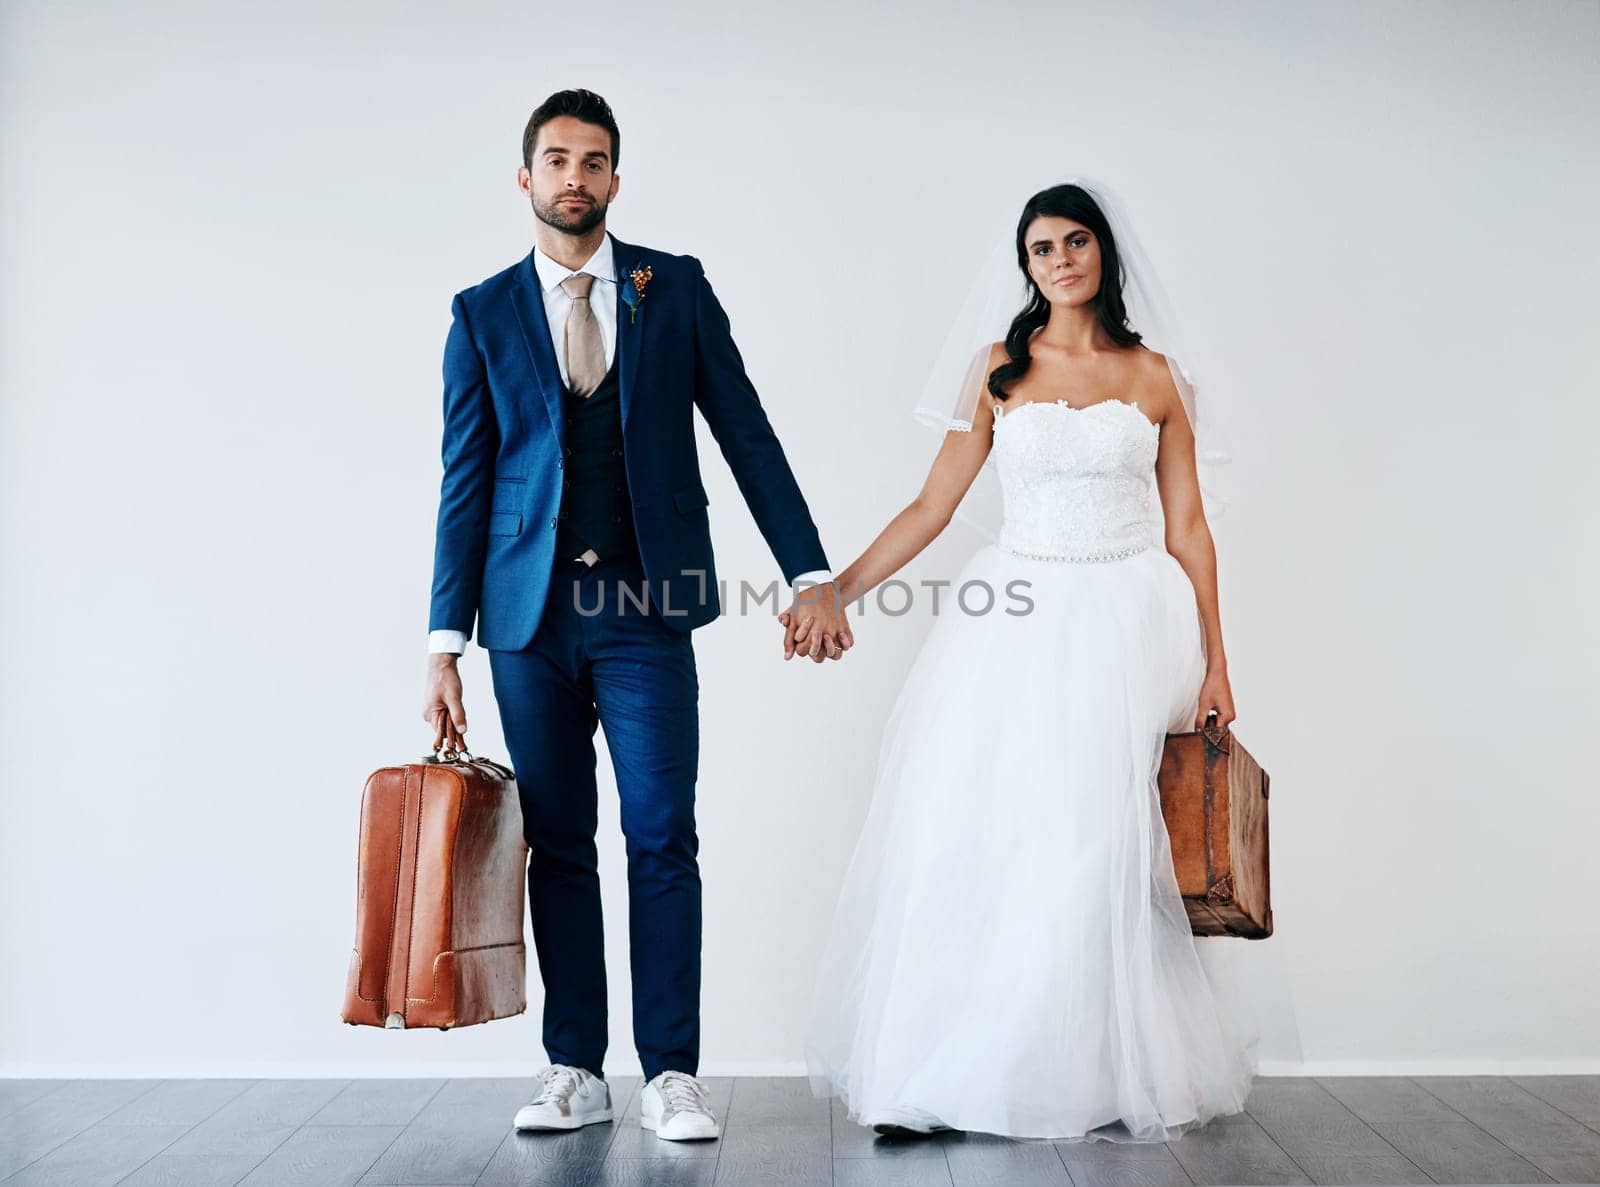 We have our travel shoes on. Studio shot of a newly married couple holding hand and carrying bags while standing against a gray background